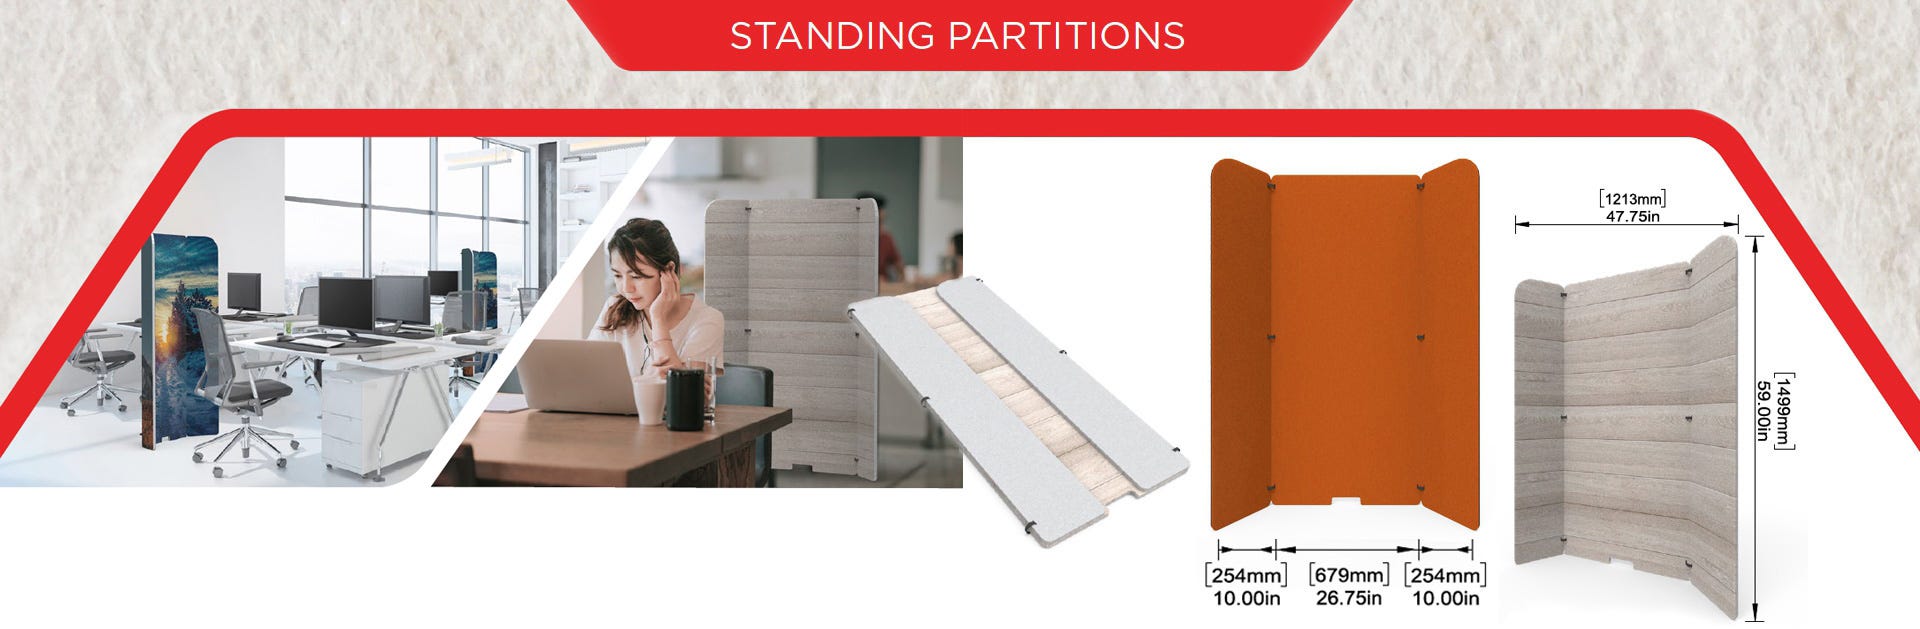 Standing partitions